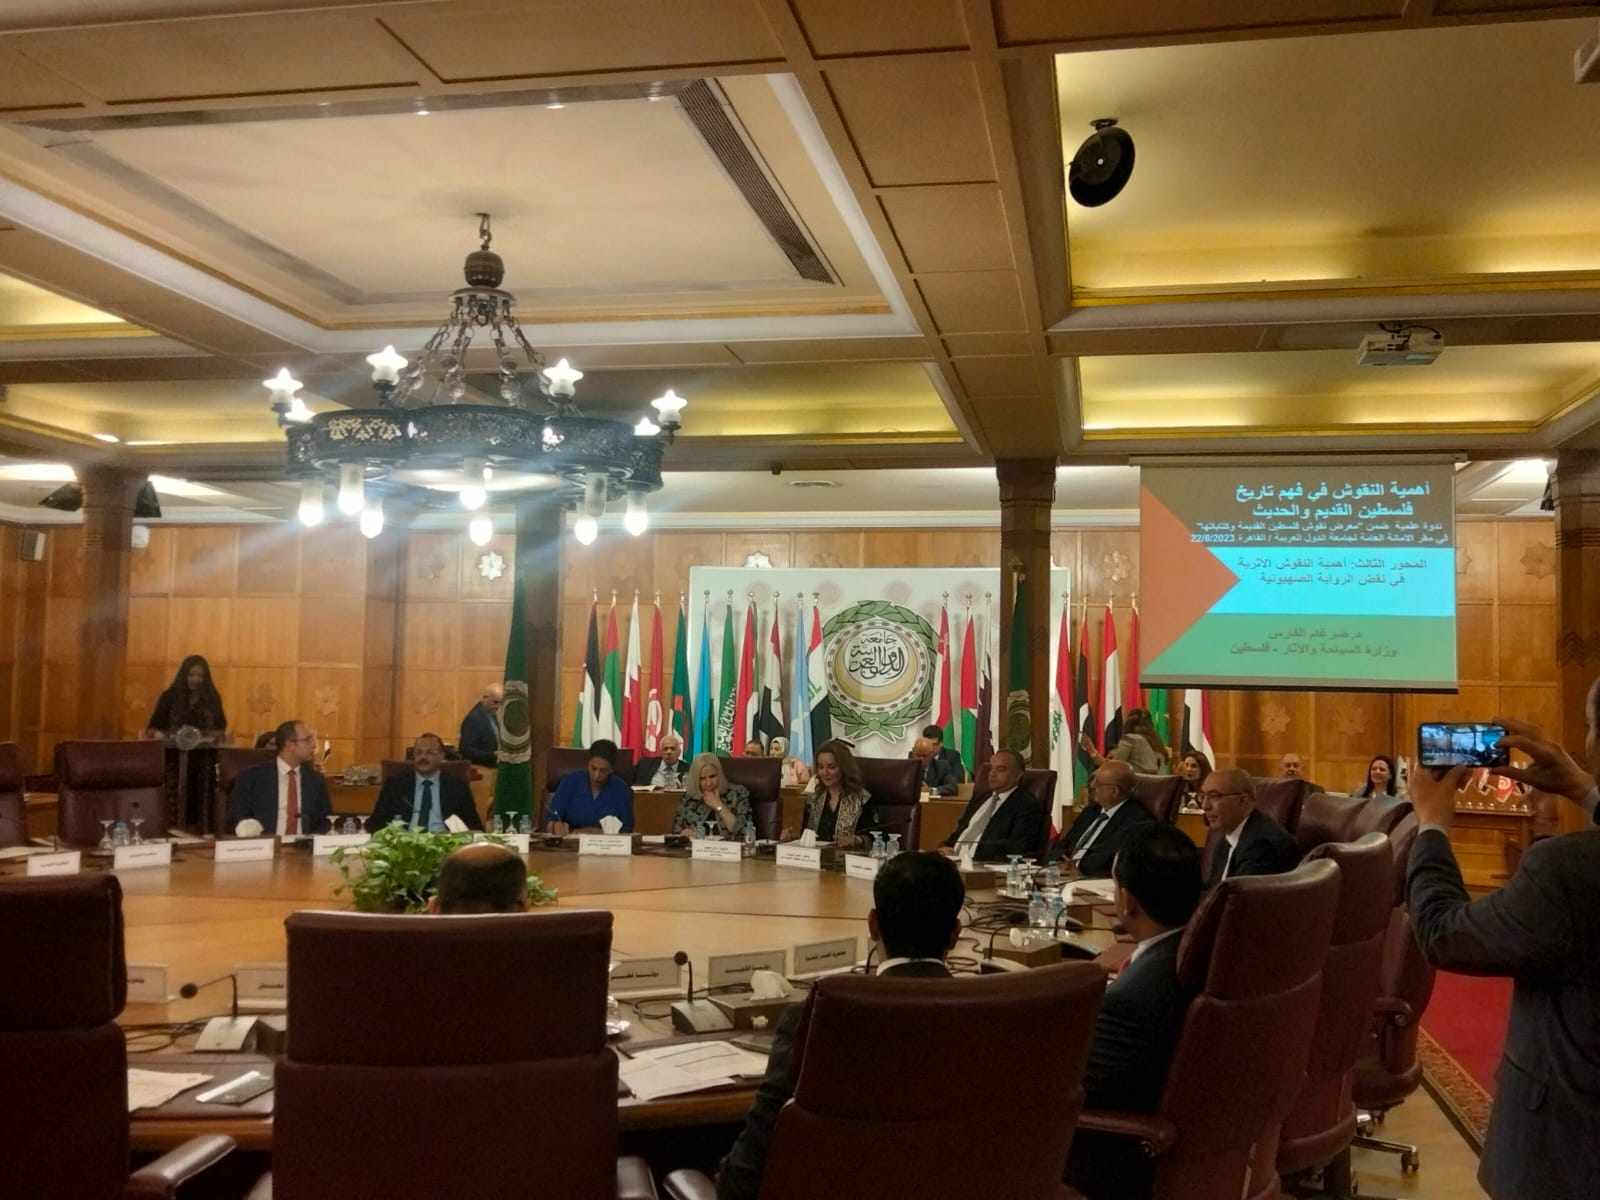 Exhibition on Ancient Palestinian Inscriptions and Writings Launches at Arab League